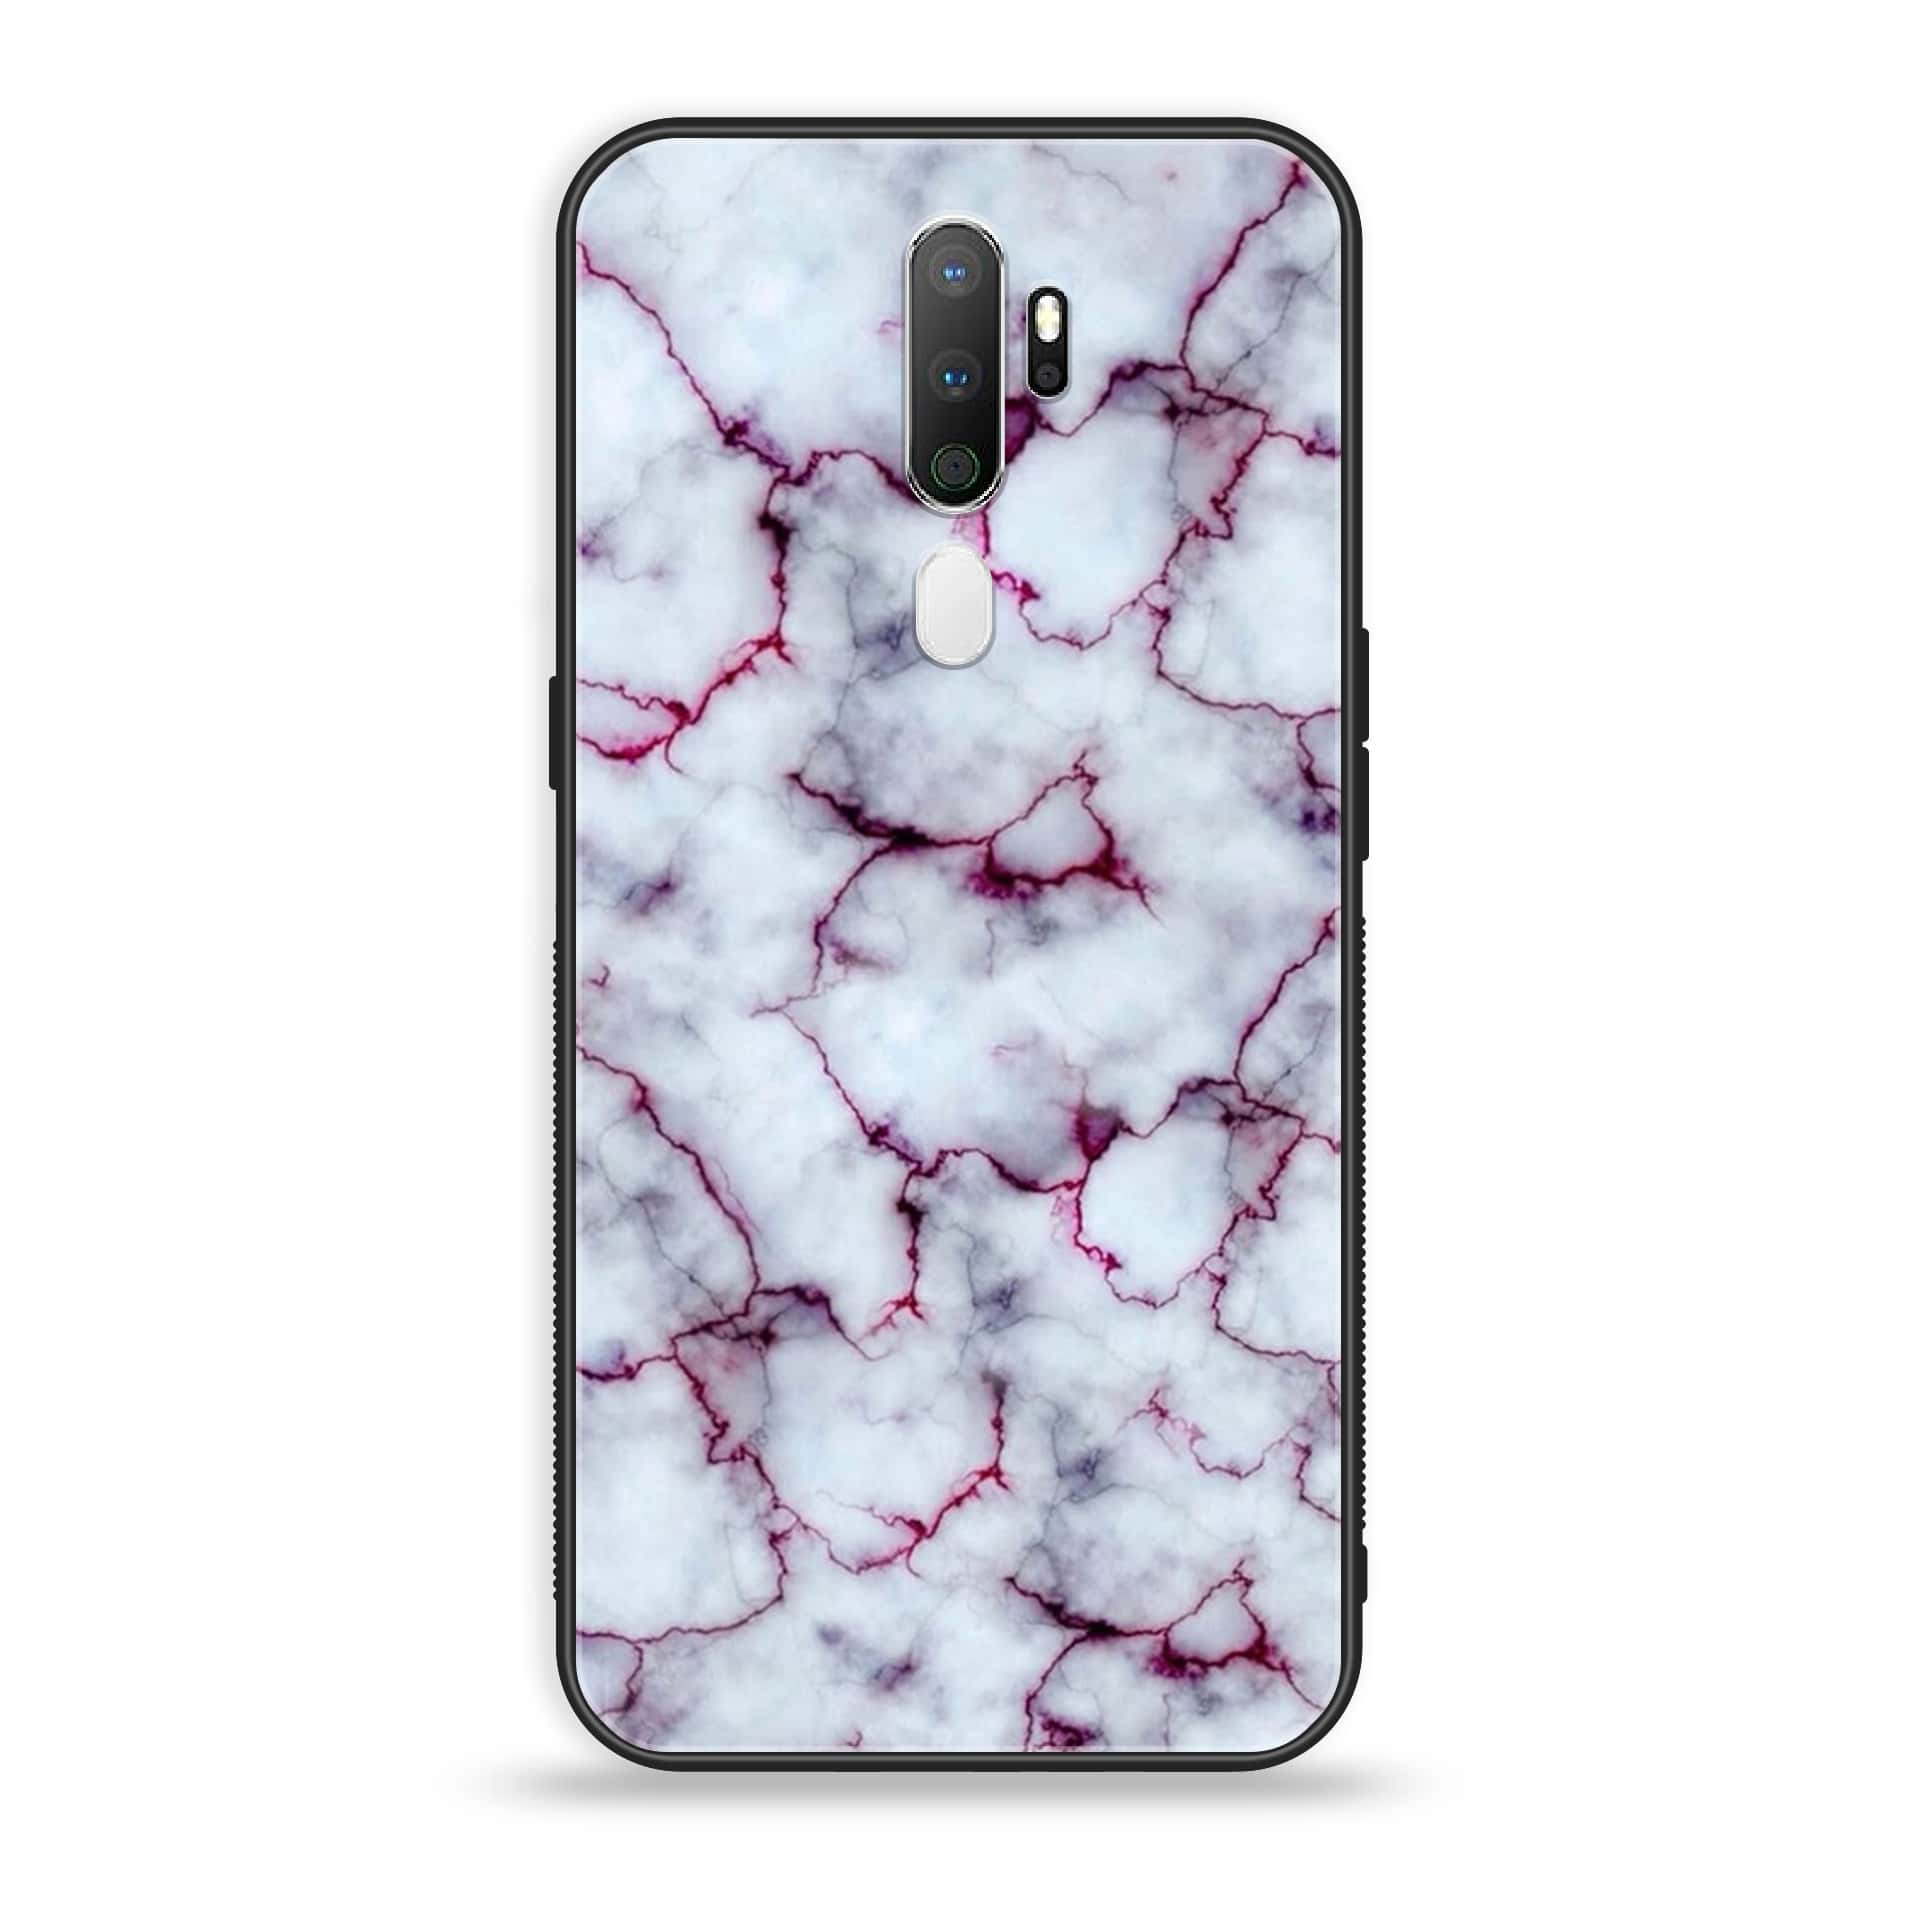 Oppo A9 2020 White Marble Series Premium Printed Glass soft Bumper shock Proof Case